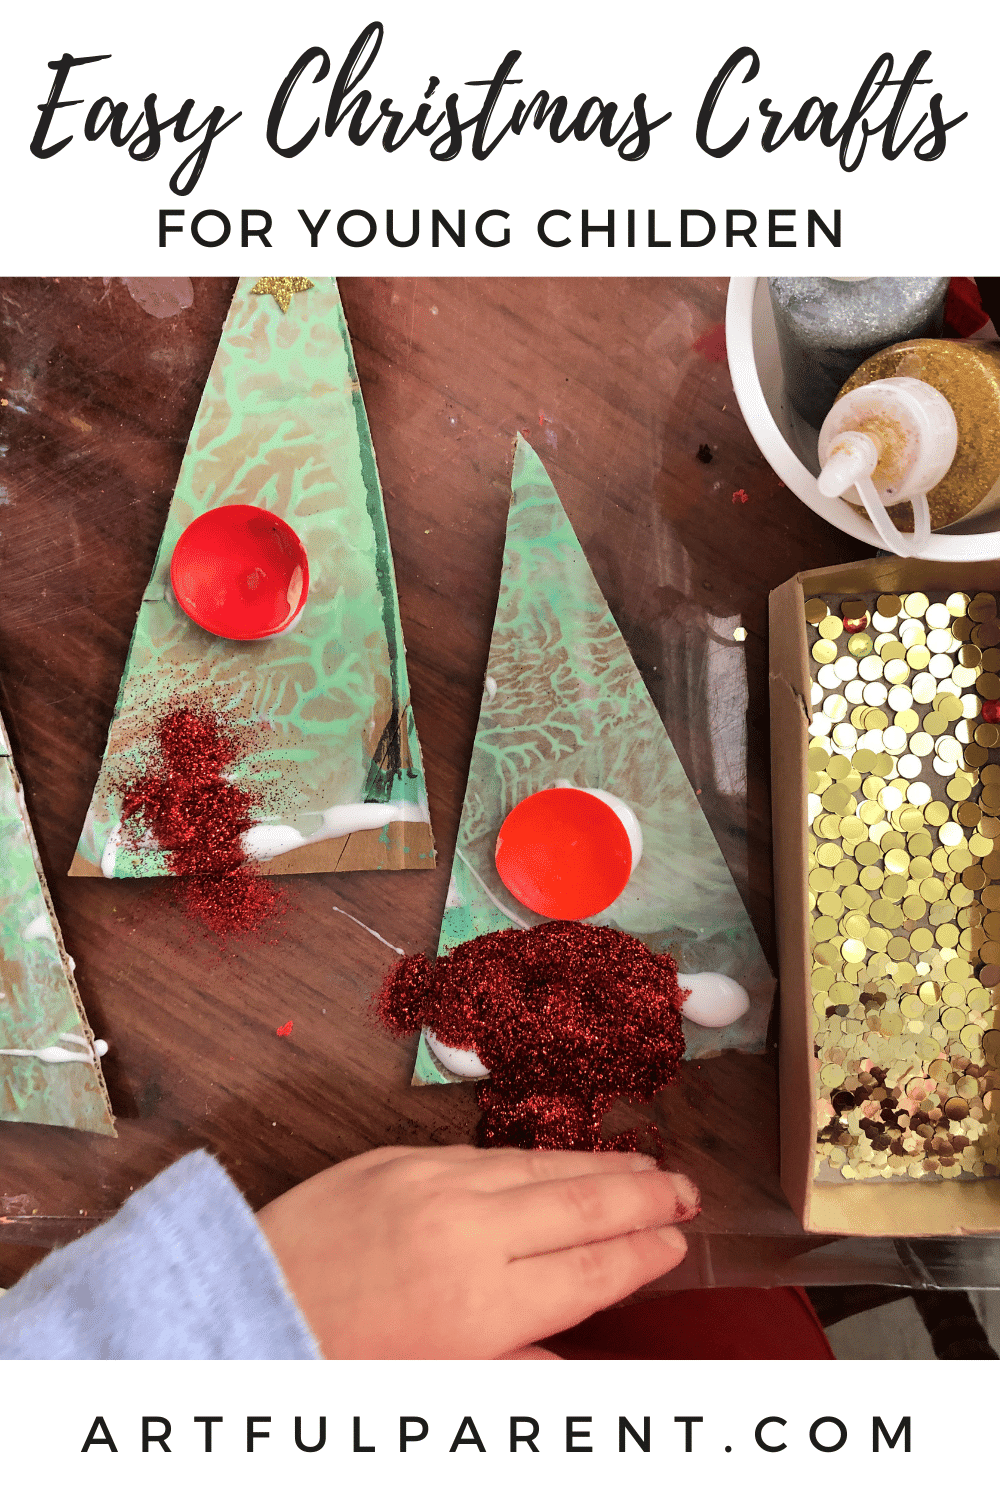 12 Easy Christmas Crafts for Toddlers